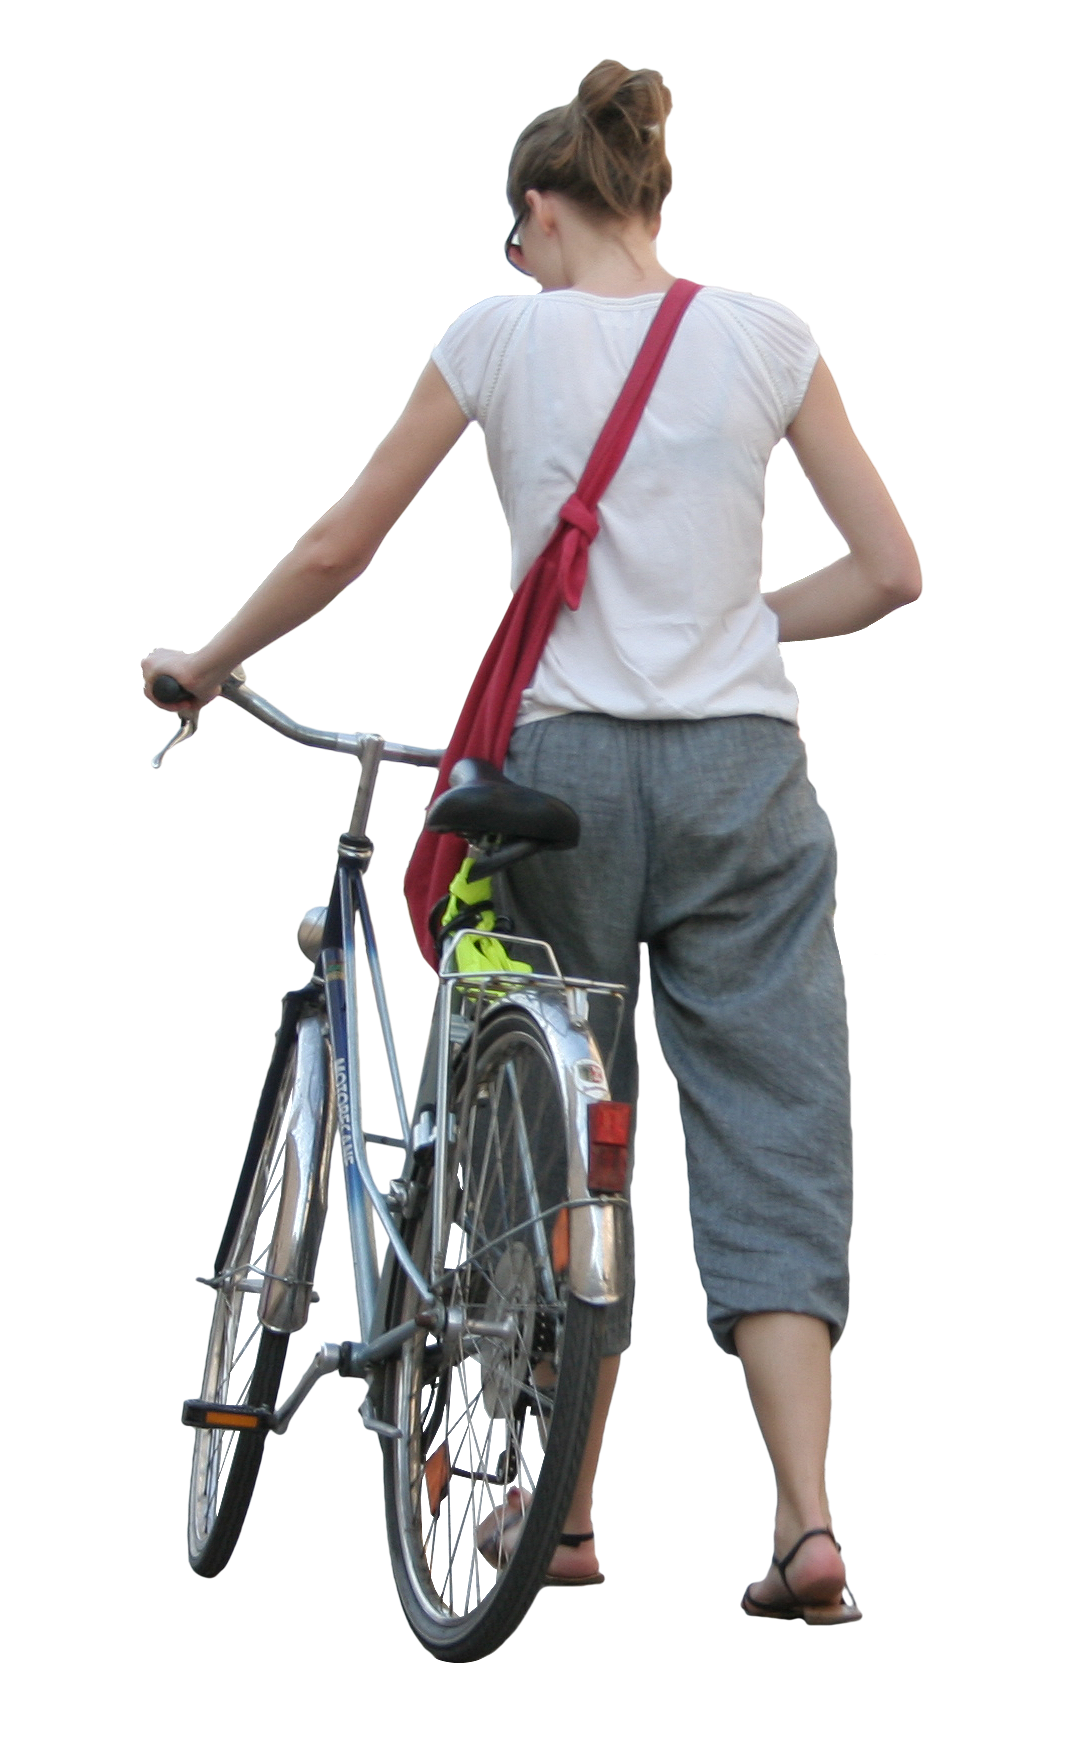 Cycling PNG images 